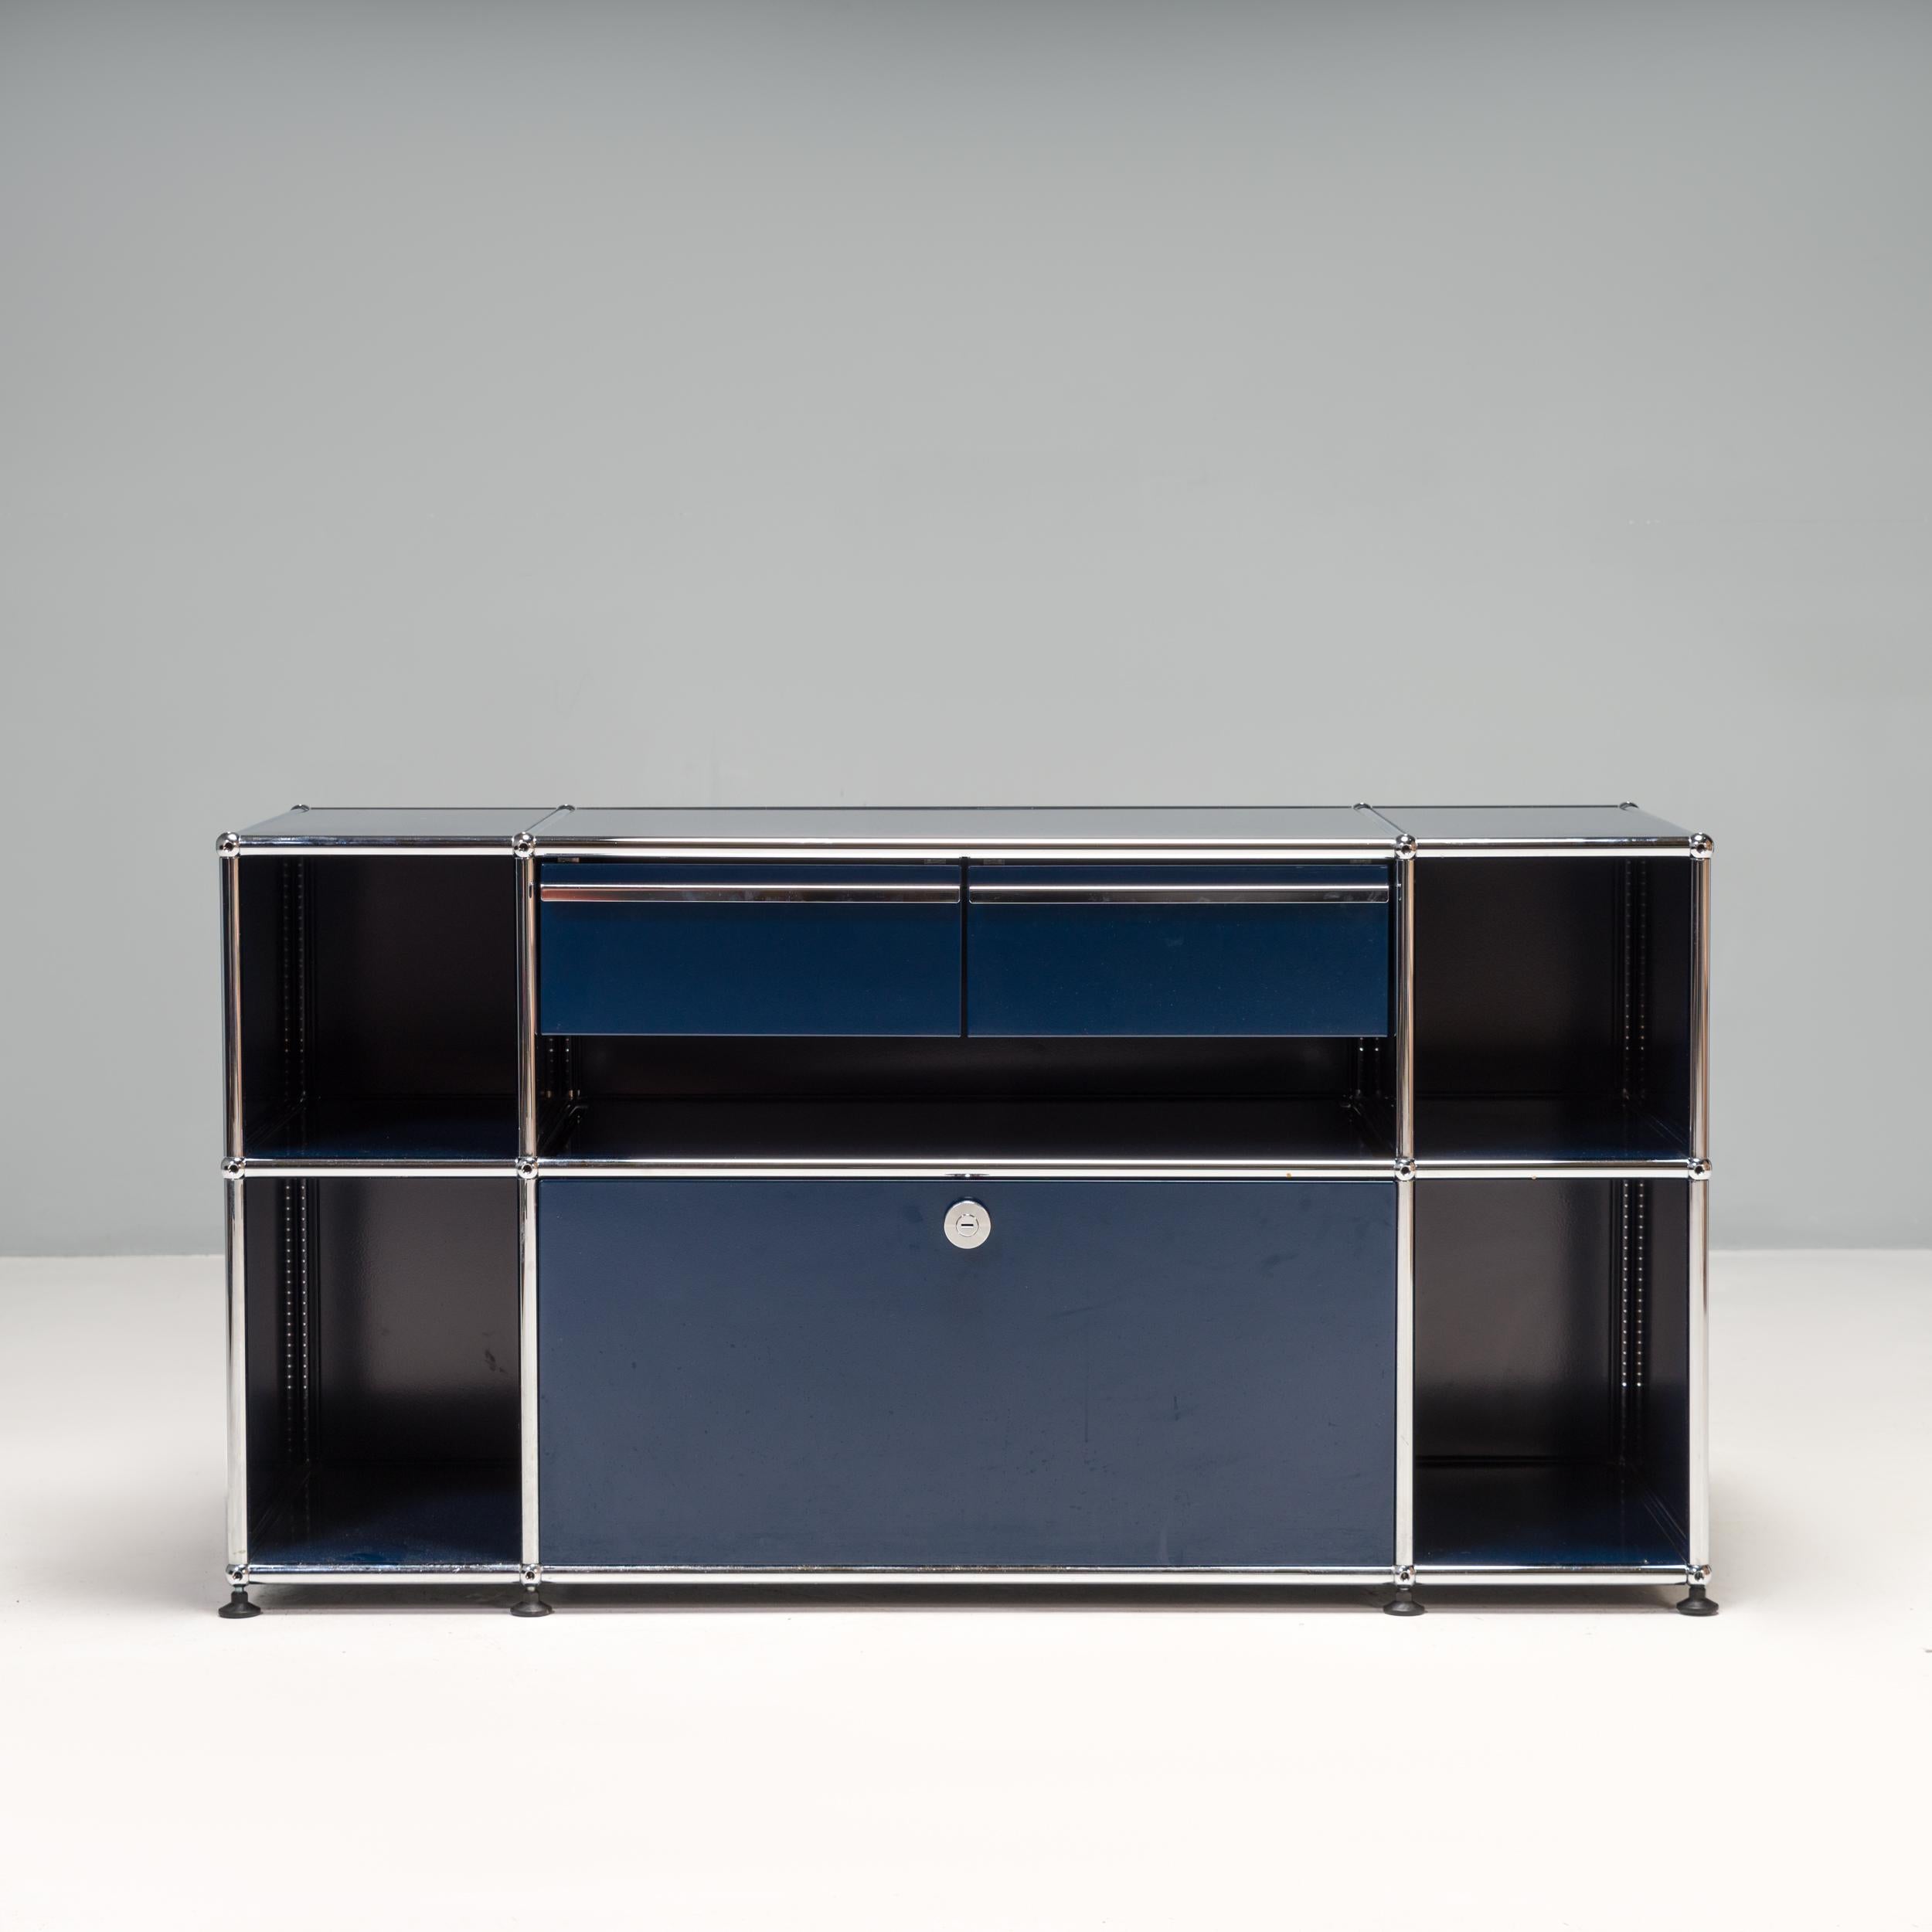 Originally designed in 1963 by Swiss architects Fritz Haller and Paul Schaerer, the USM Haller system is made up of different modules allowing for customisable storage solutions.

The sideboard is constructed from chrome plated steel tubular frame